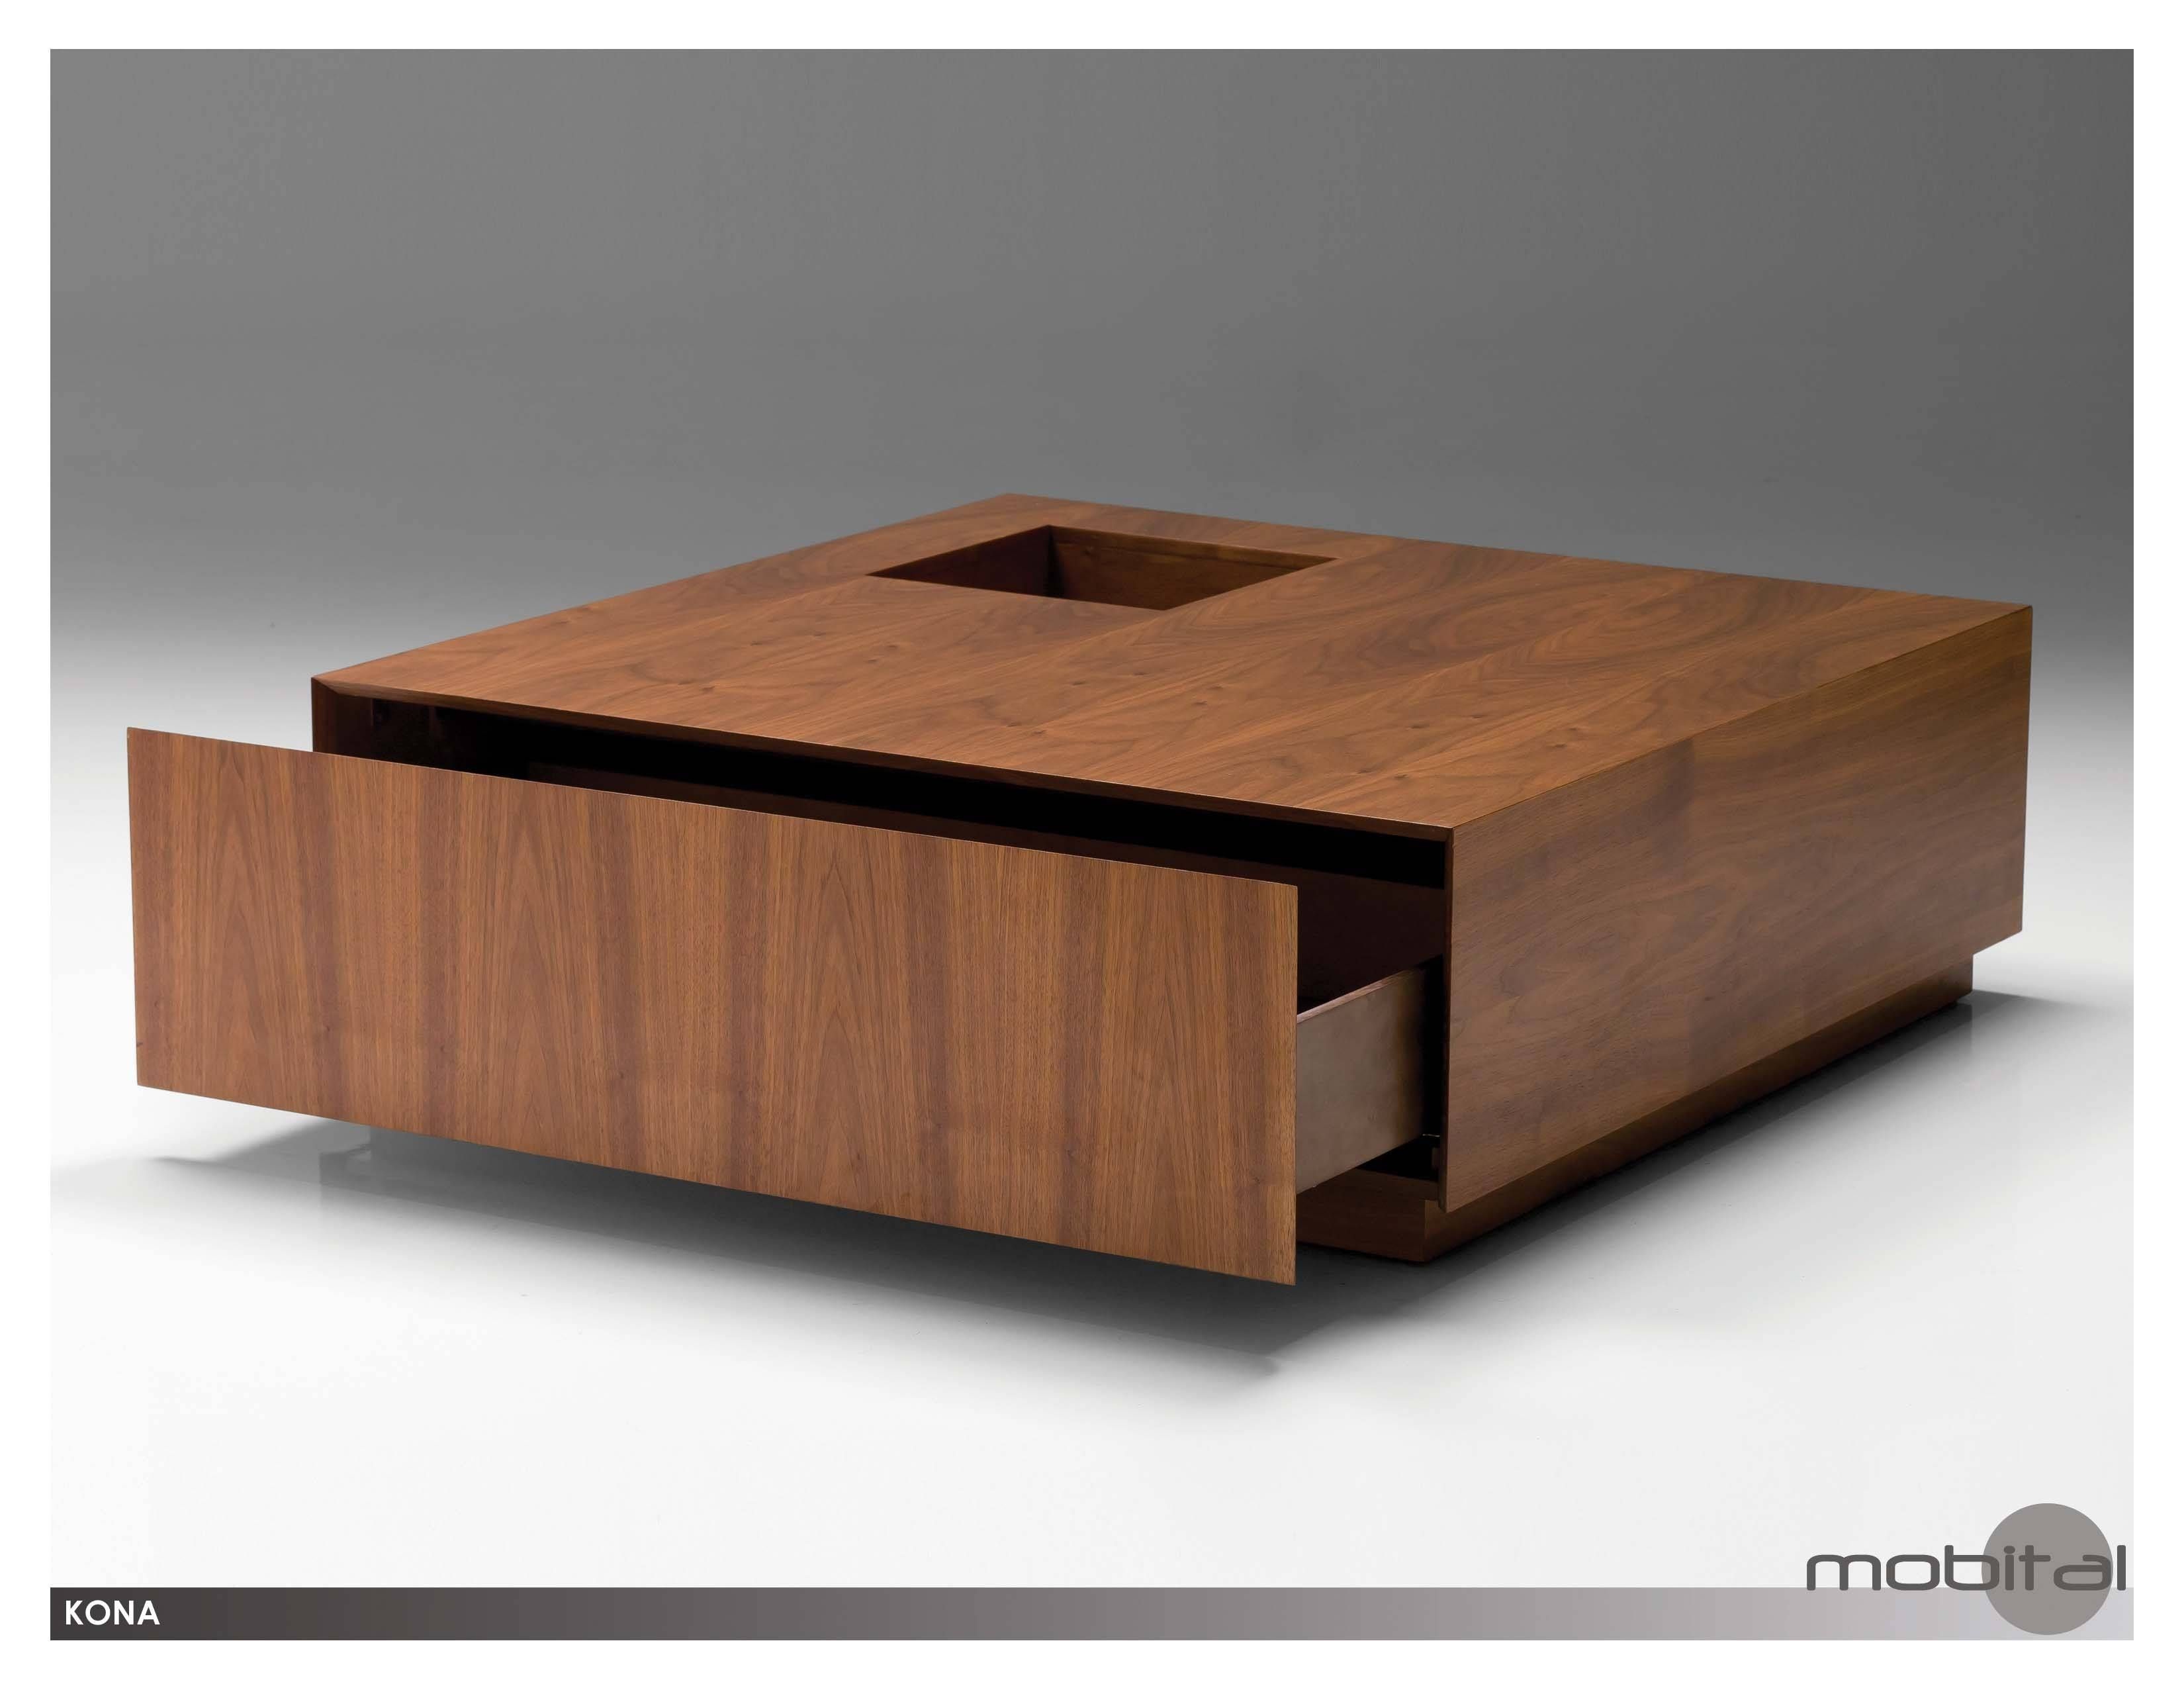 Coffee Table: Amusing Square Coffee Table With Storage Designs Regarding Square Coffee Tables With Storage (View 7 of 30)